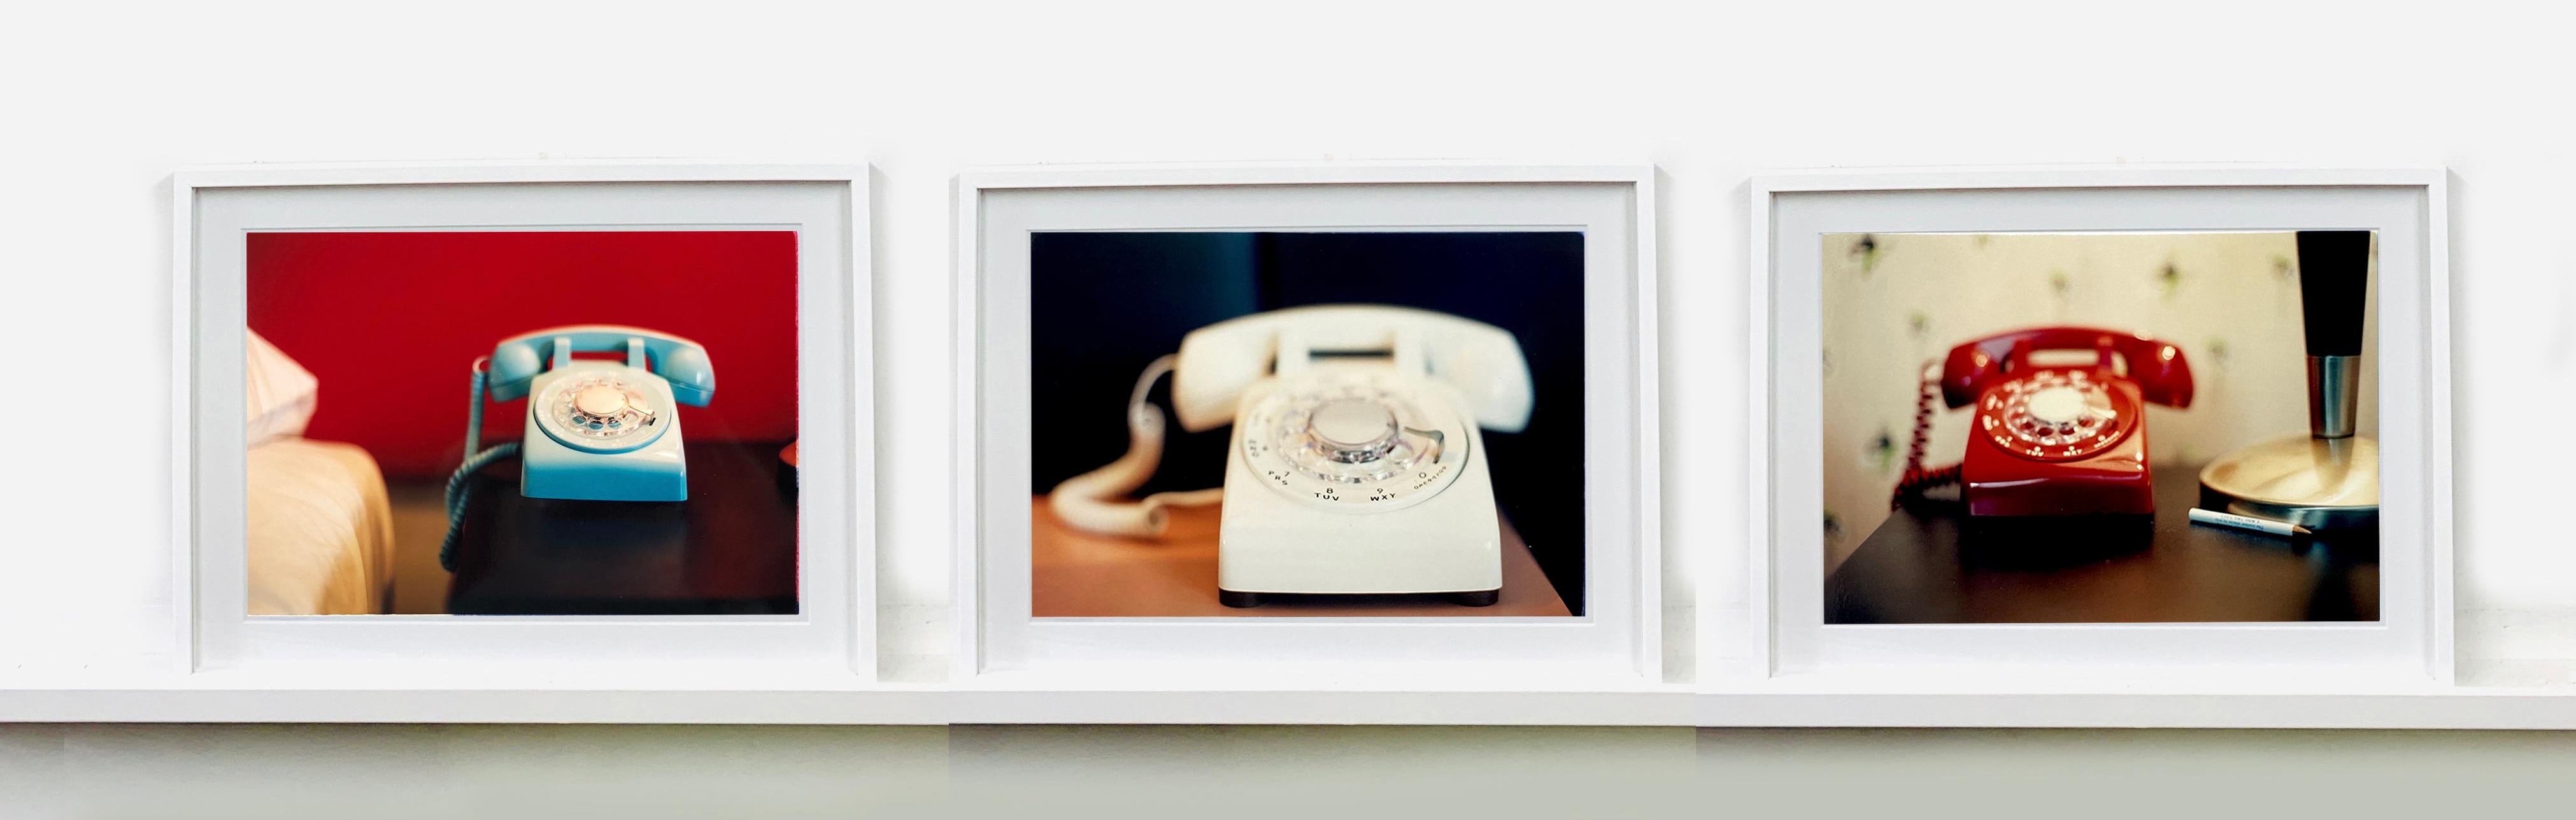 'Telephone VII' part of Richard Heeps 'Dream in Colour' Series. 
This cool Palm Springs interior photography featuring a vintage red telephone on a nightstand it has a dreamy nostalgic mid-century vibes.

This artwork is a limited edition of 25,